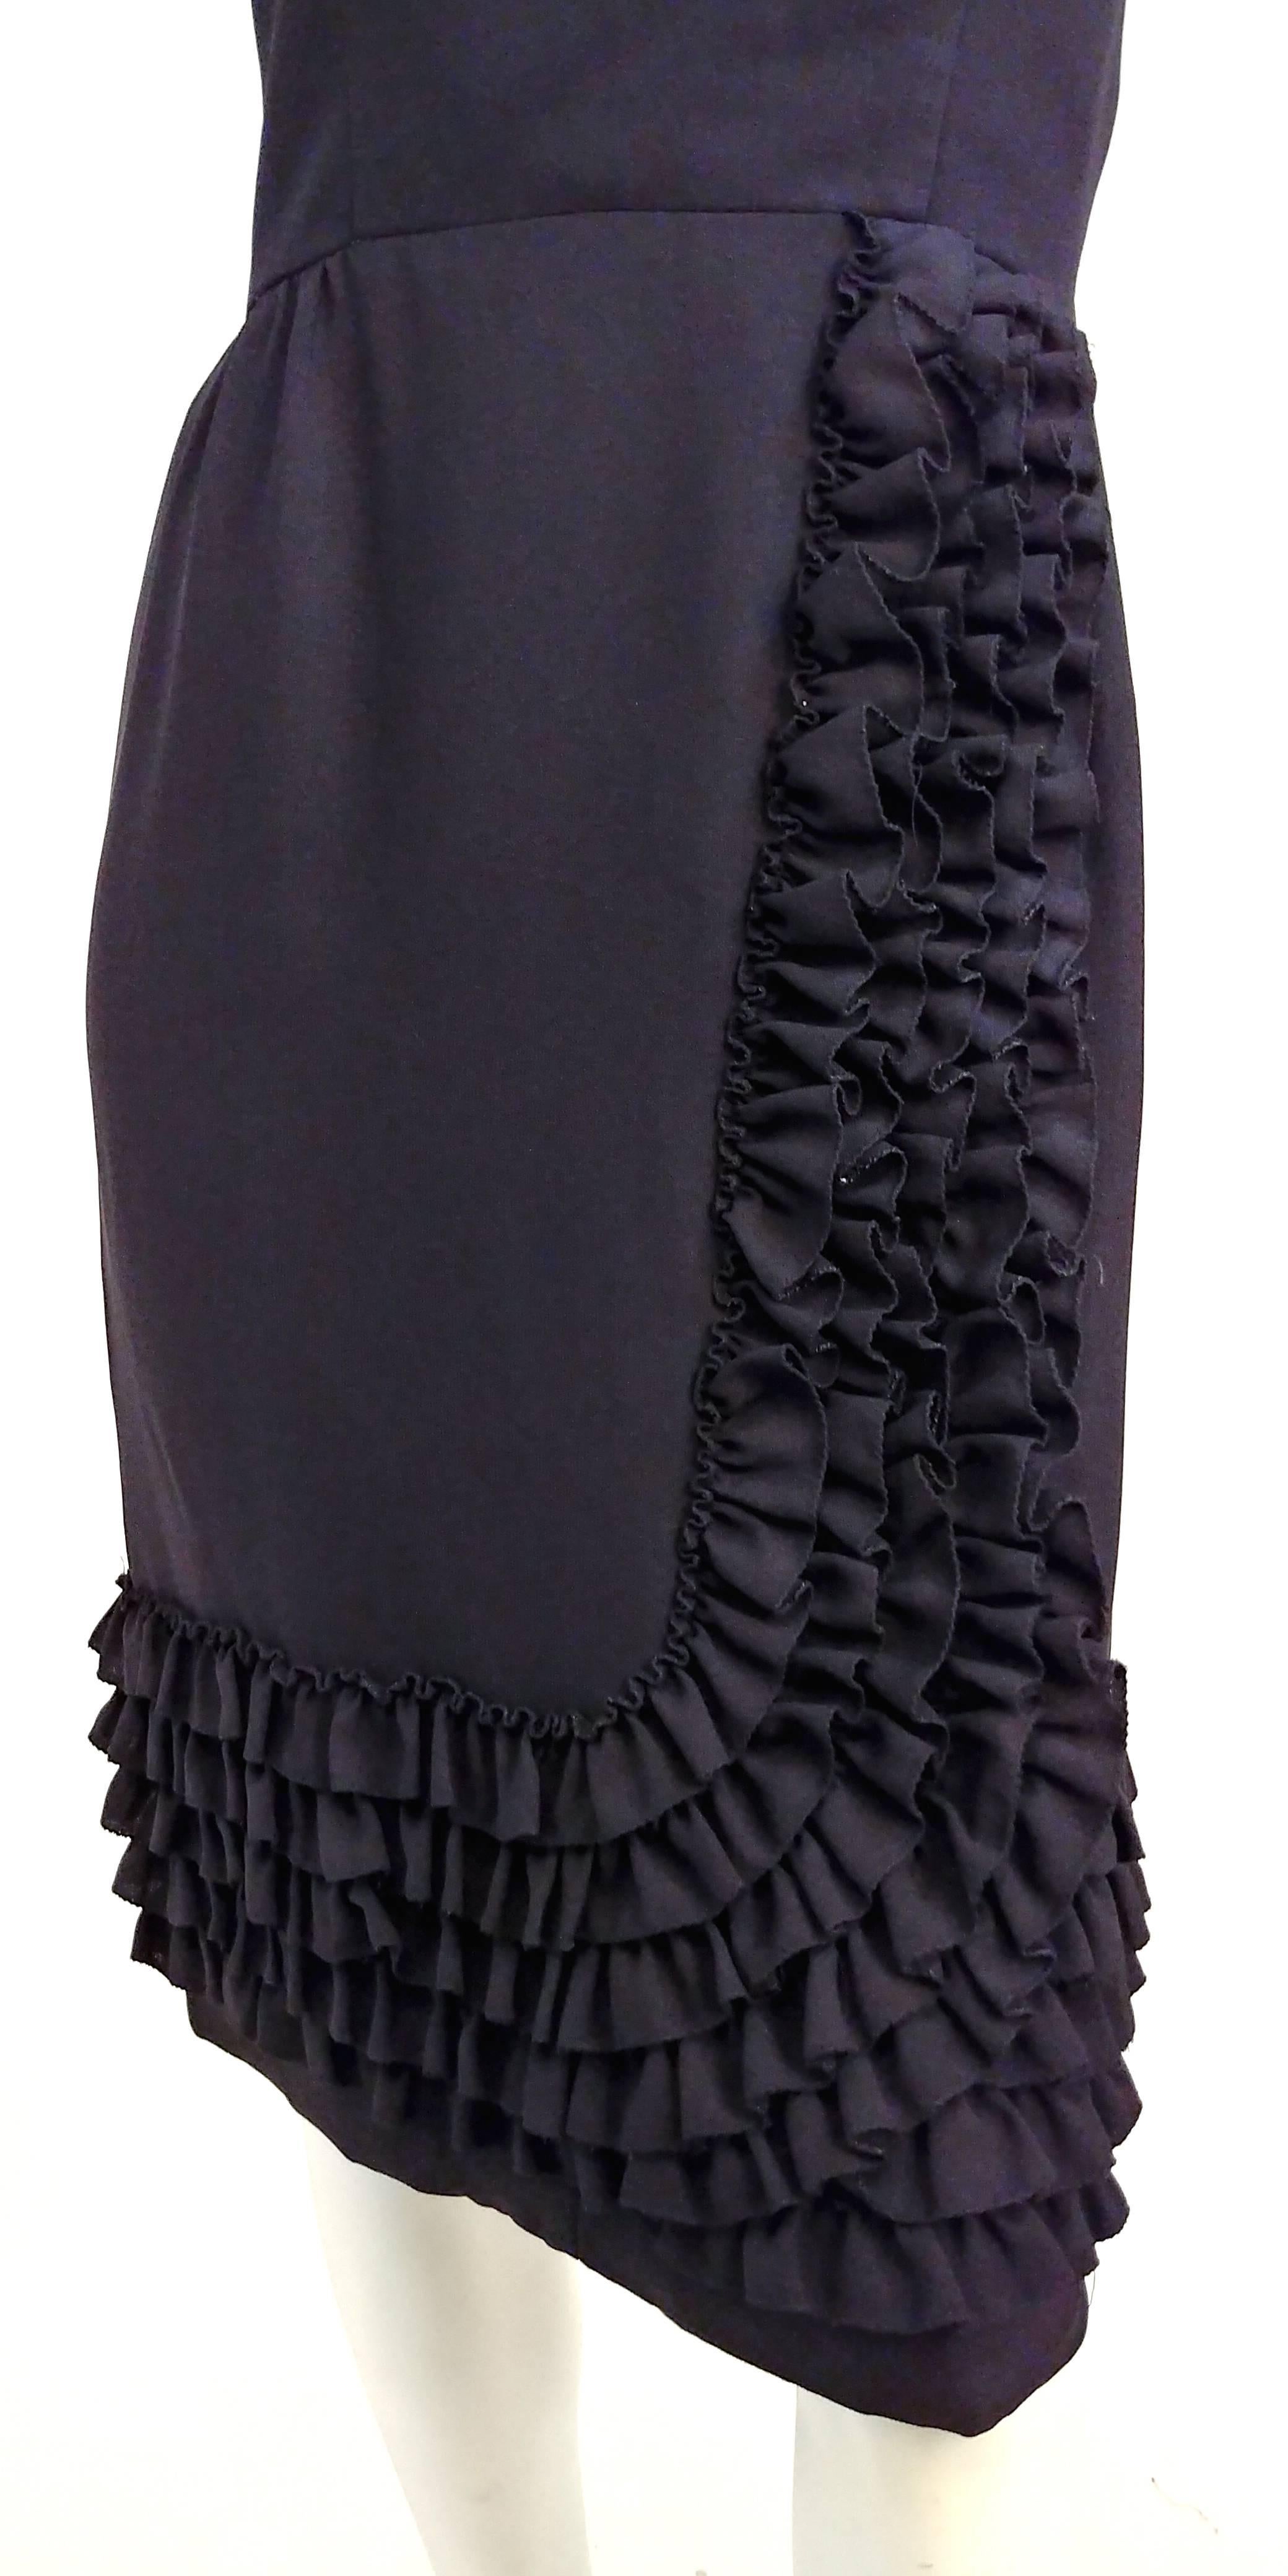 1960s Ruffled Front Cocktail Dress. Black crepe fabric, fully lined.